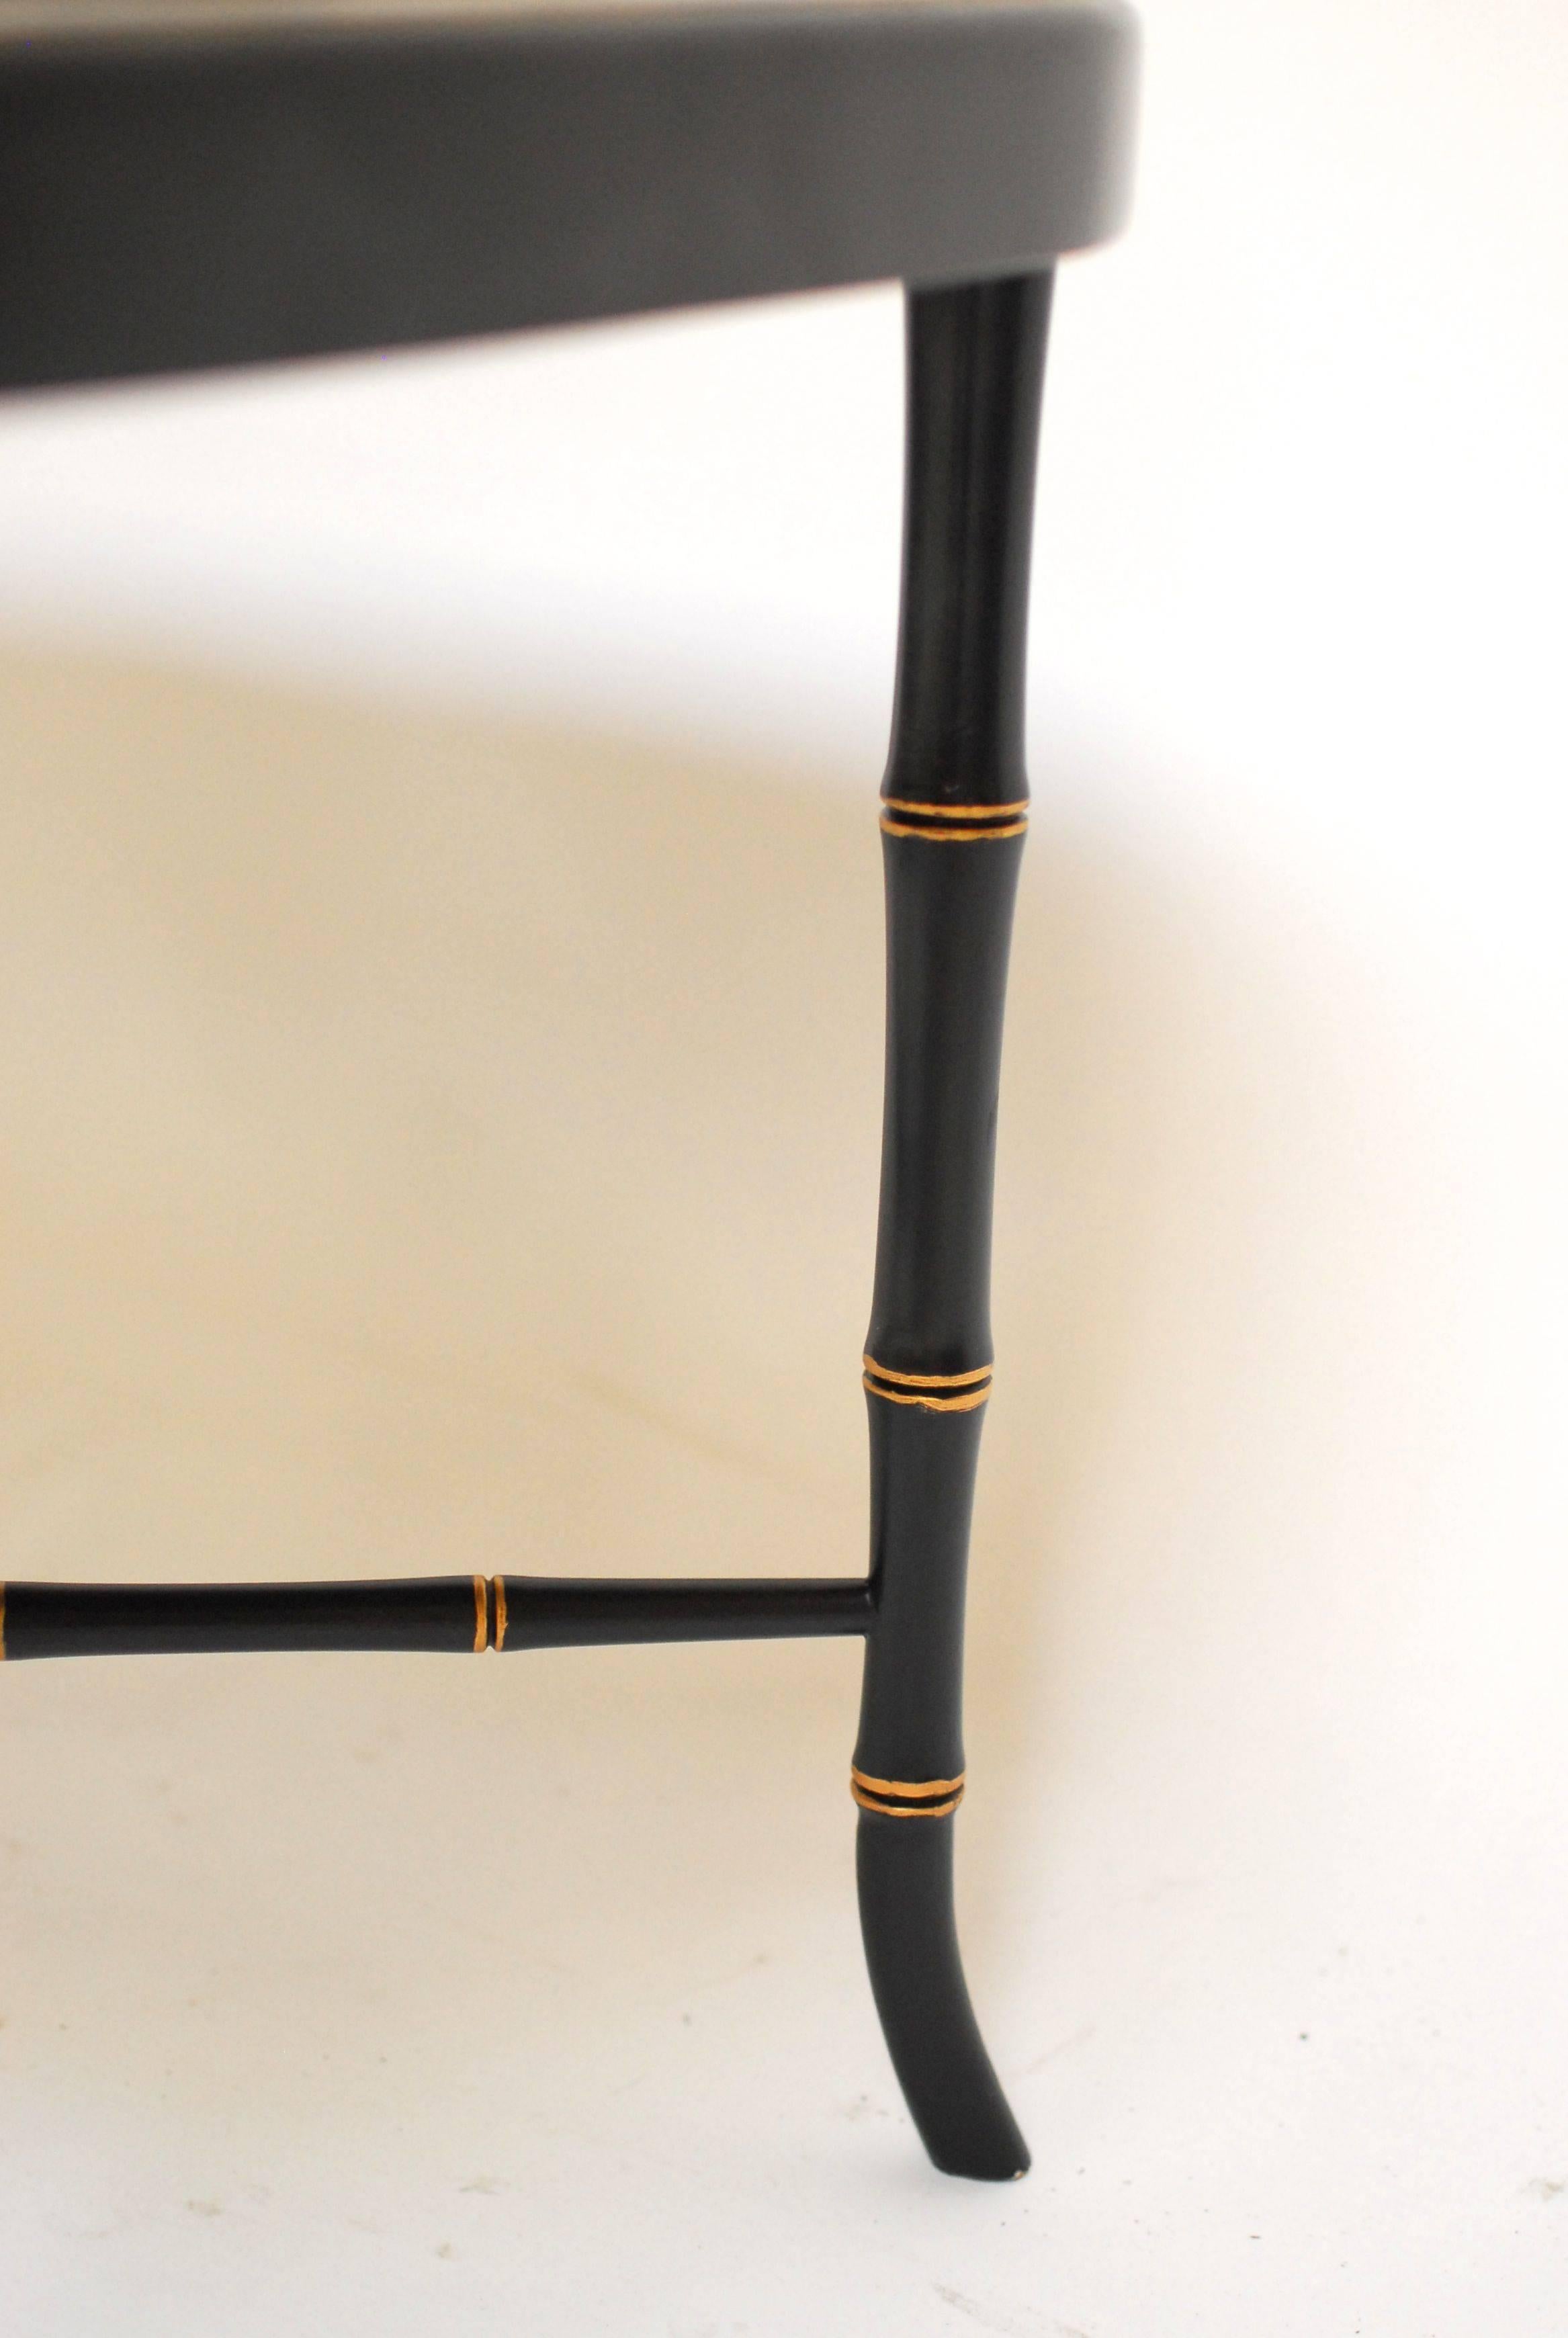 Antique French Chinoiserie gilt decorated metal tray table on a custom made an ebonized wood faux bamboo stand. Beautifully painted tray with intricate detail done in the Asian taste. Sits on a custom wood stand featuring faux bamboo legs and